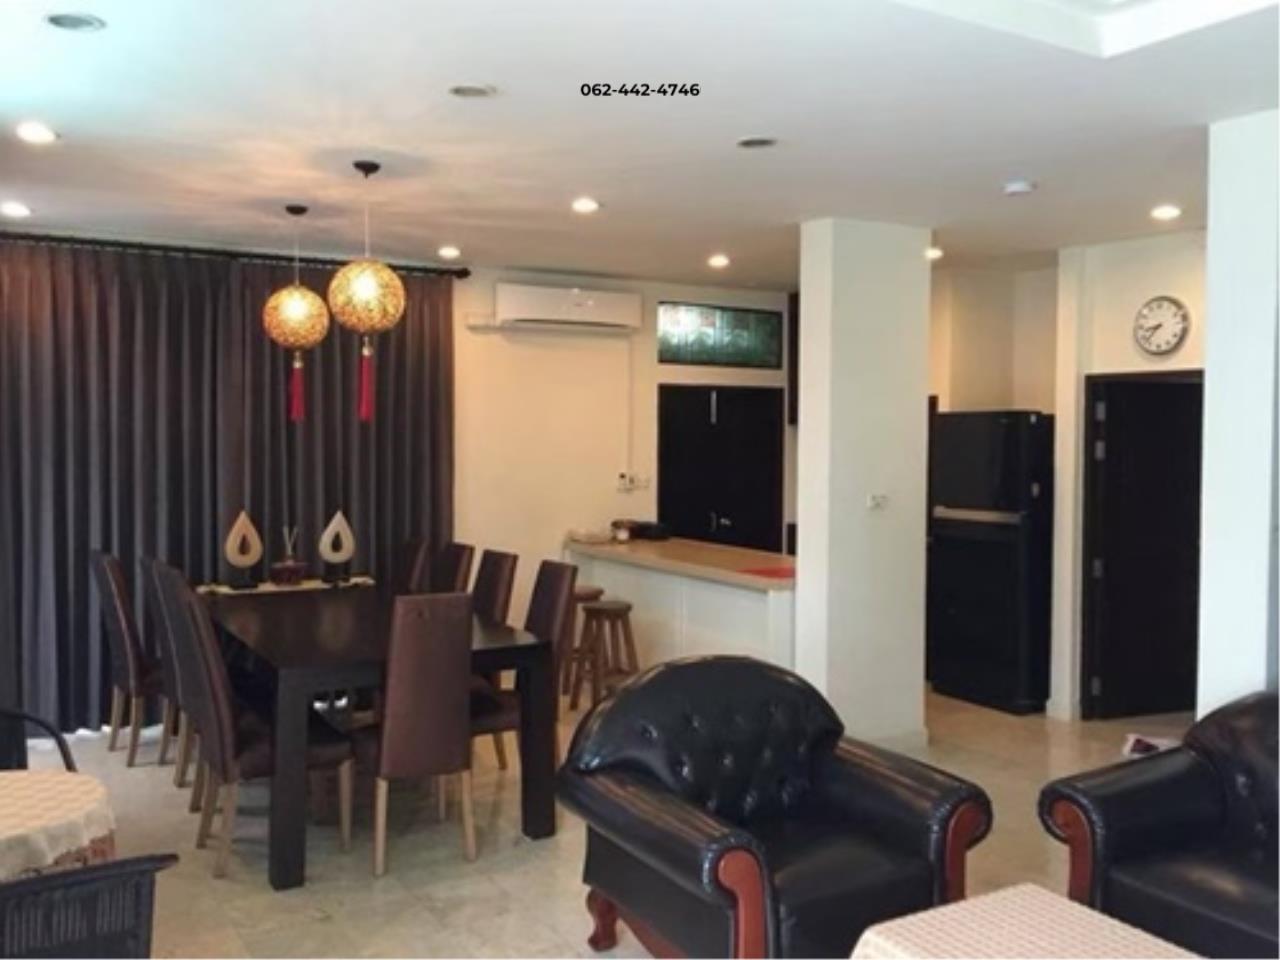 Jangproperty Agency's PUH_00161 House for sale Lanna Montra Hang Dong Chiang Mai  3